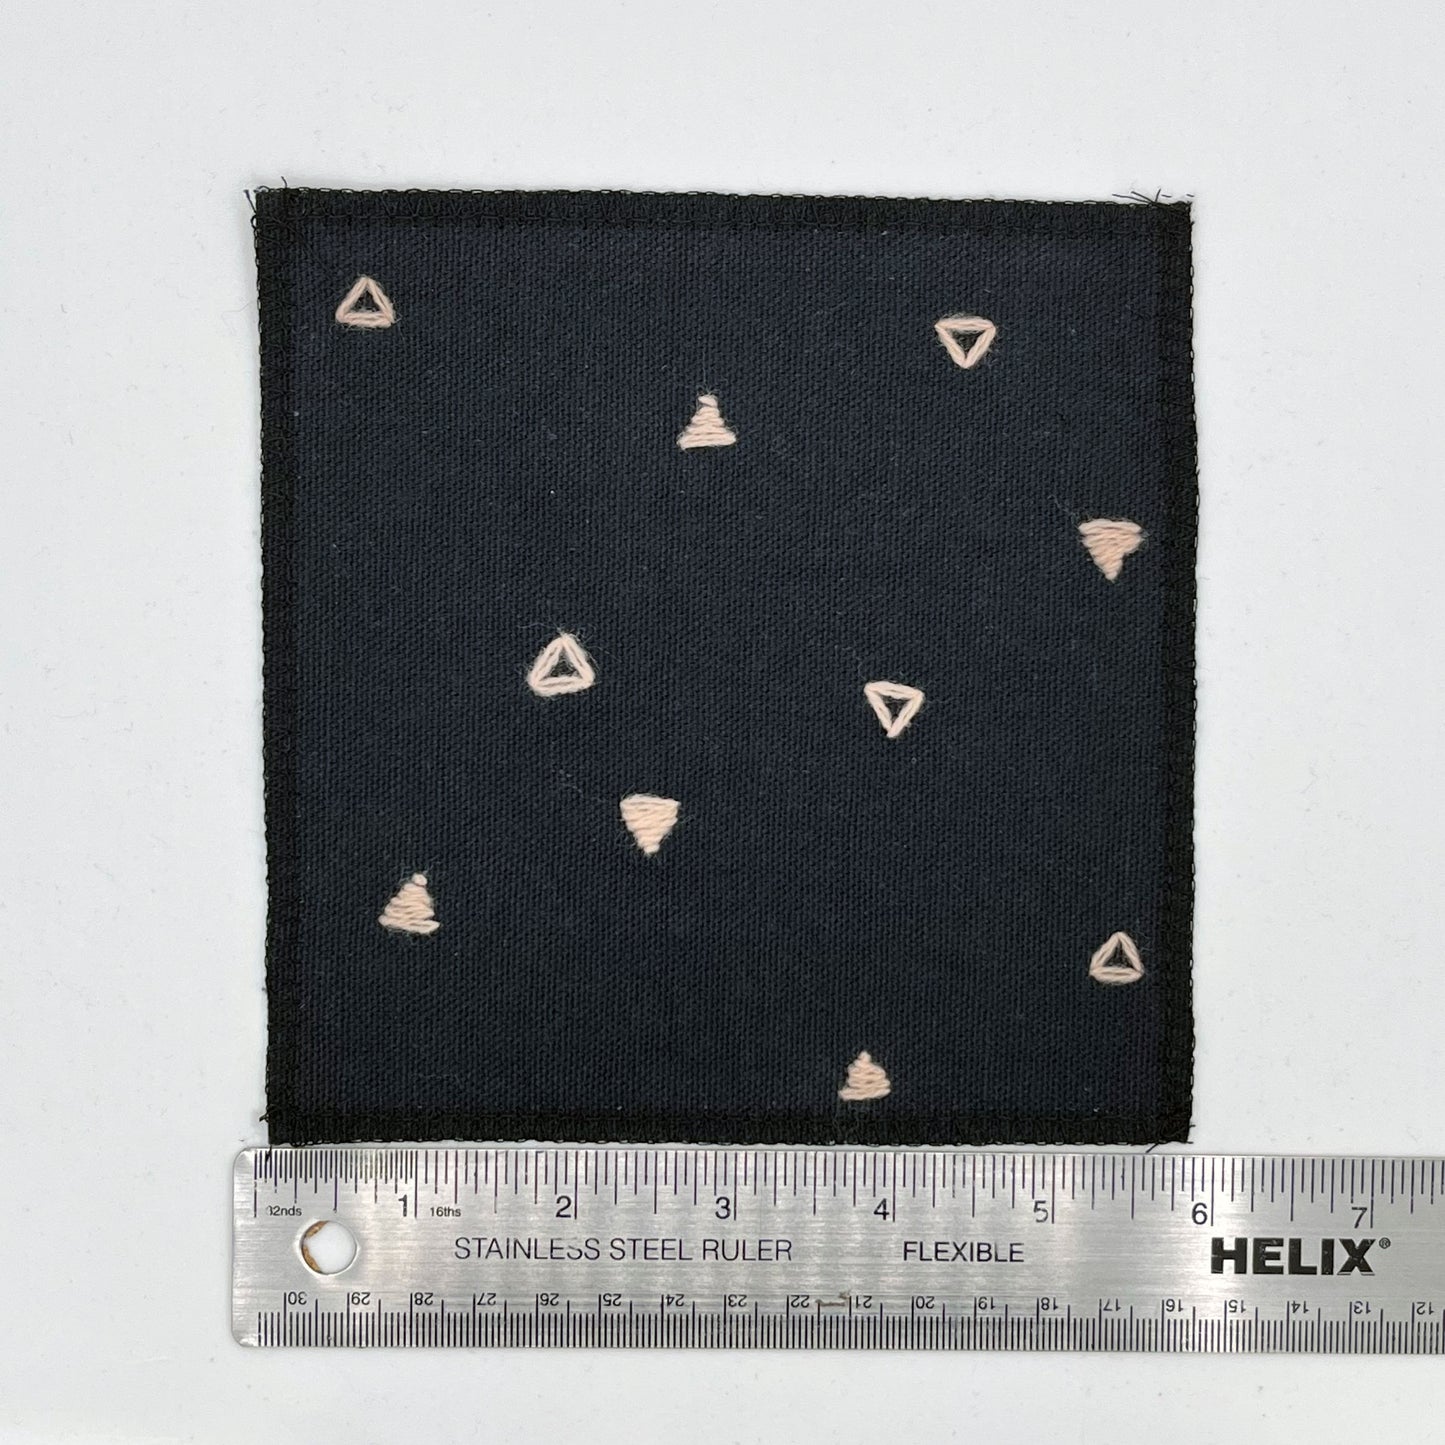 a square patch made out of black canvas, handstitched with scattered peach triangles, some as outlines some with a line fill, with overlocked edges, on a white background, next to a ruler showing a width of 6 inches